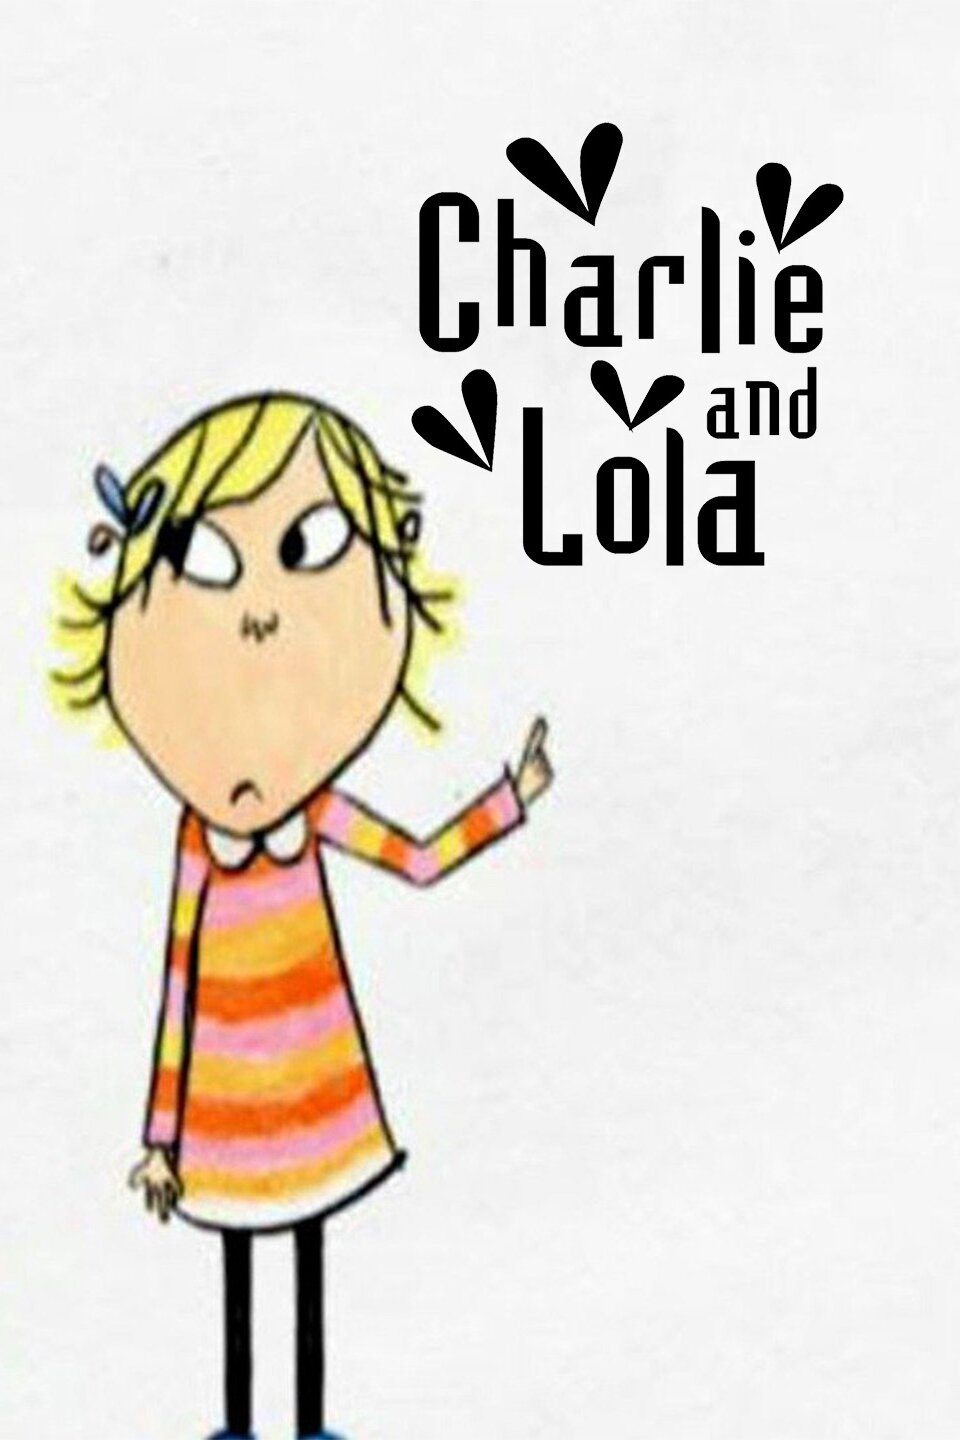 Charlie and Lola Rotten Tomatoes